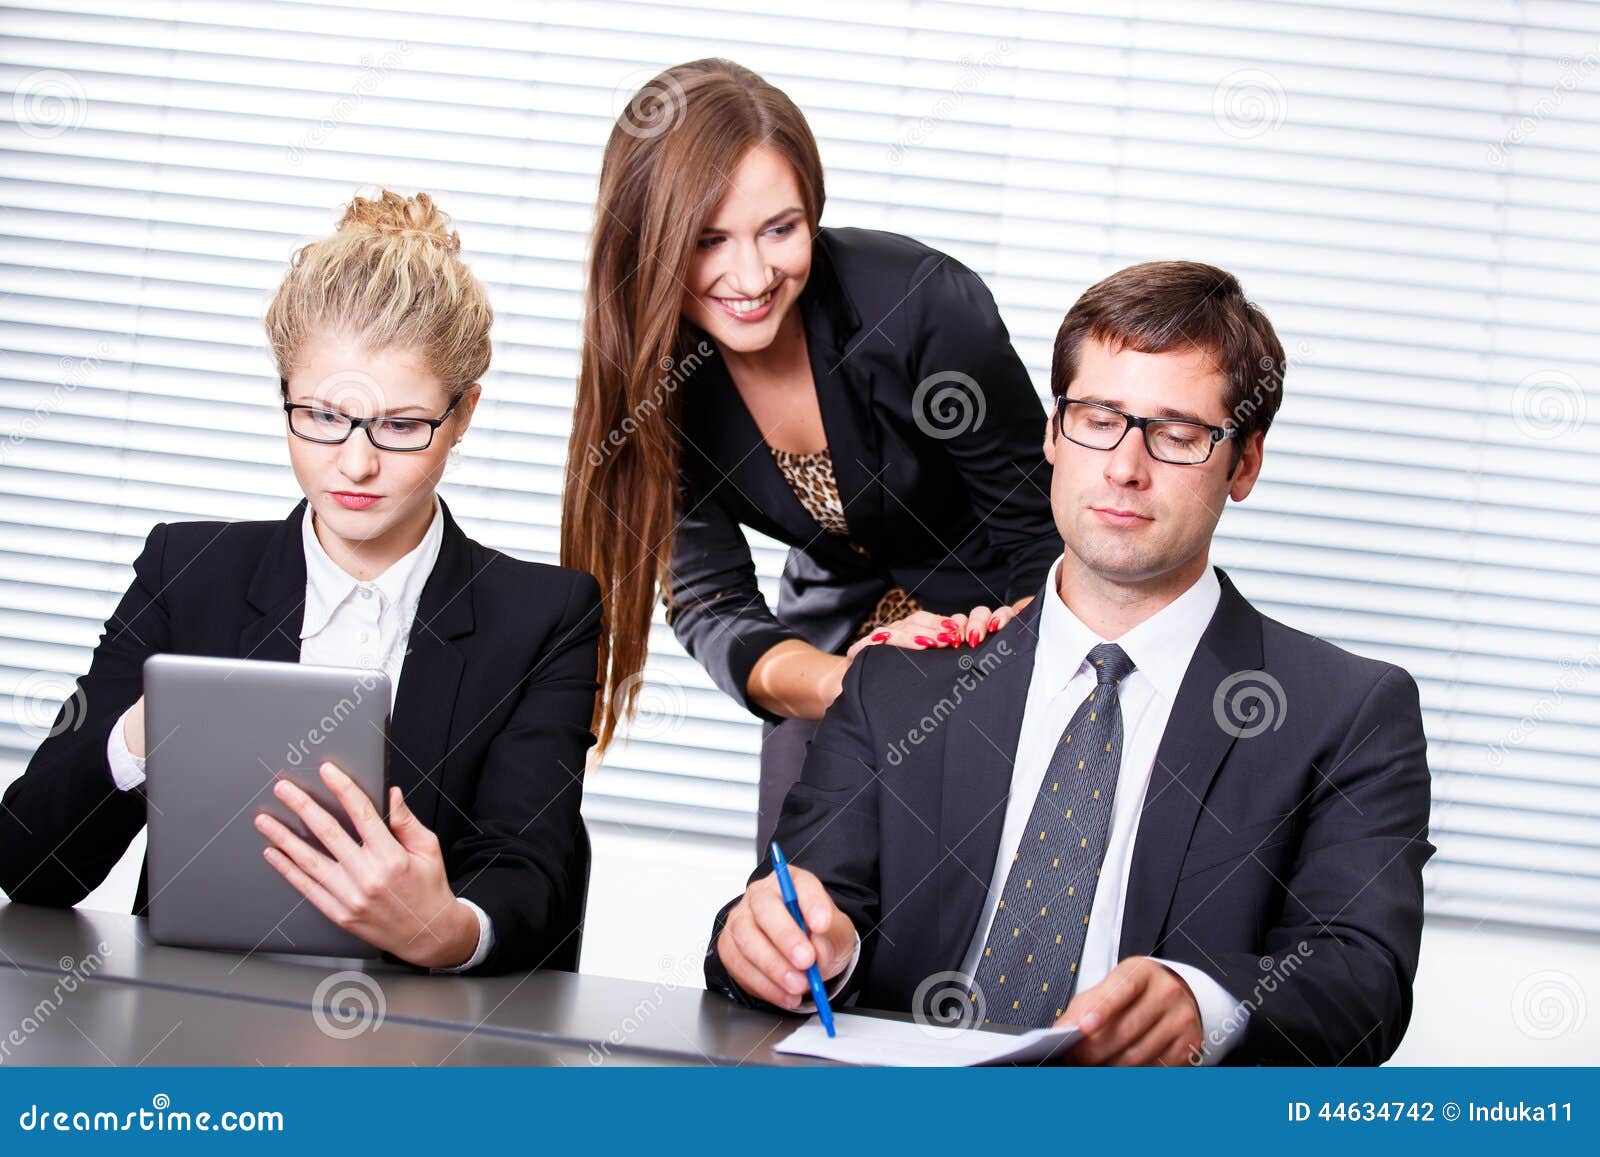 Contract Signing in Business Meeting Stock Photo - Image of business ...